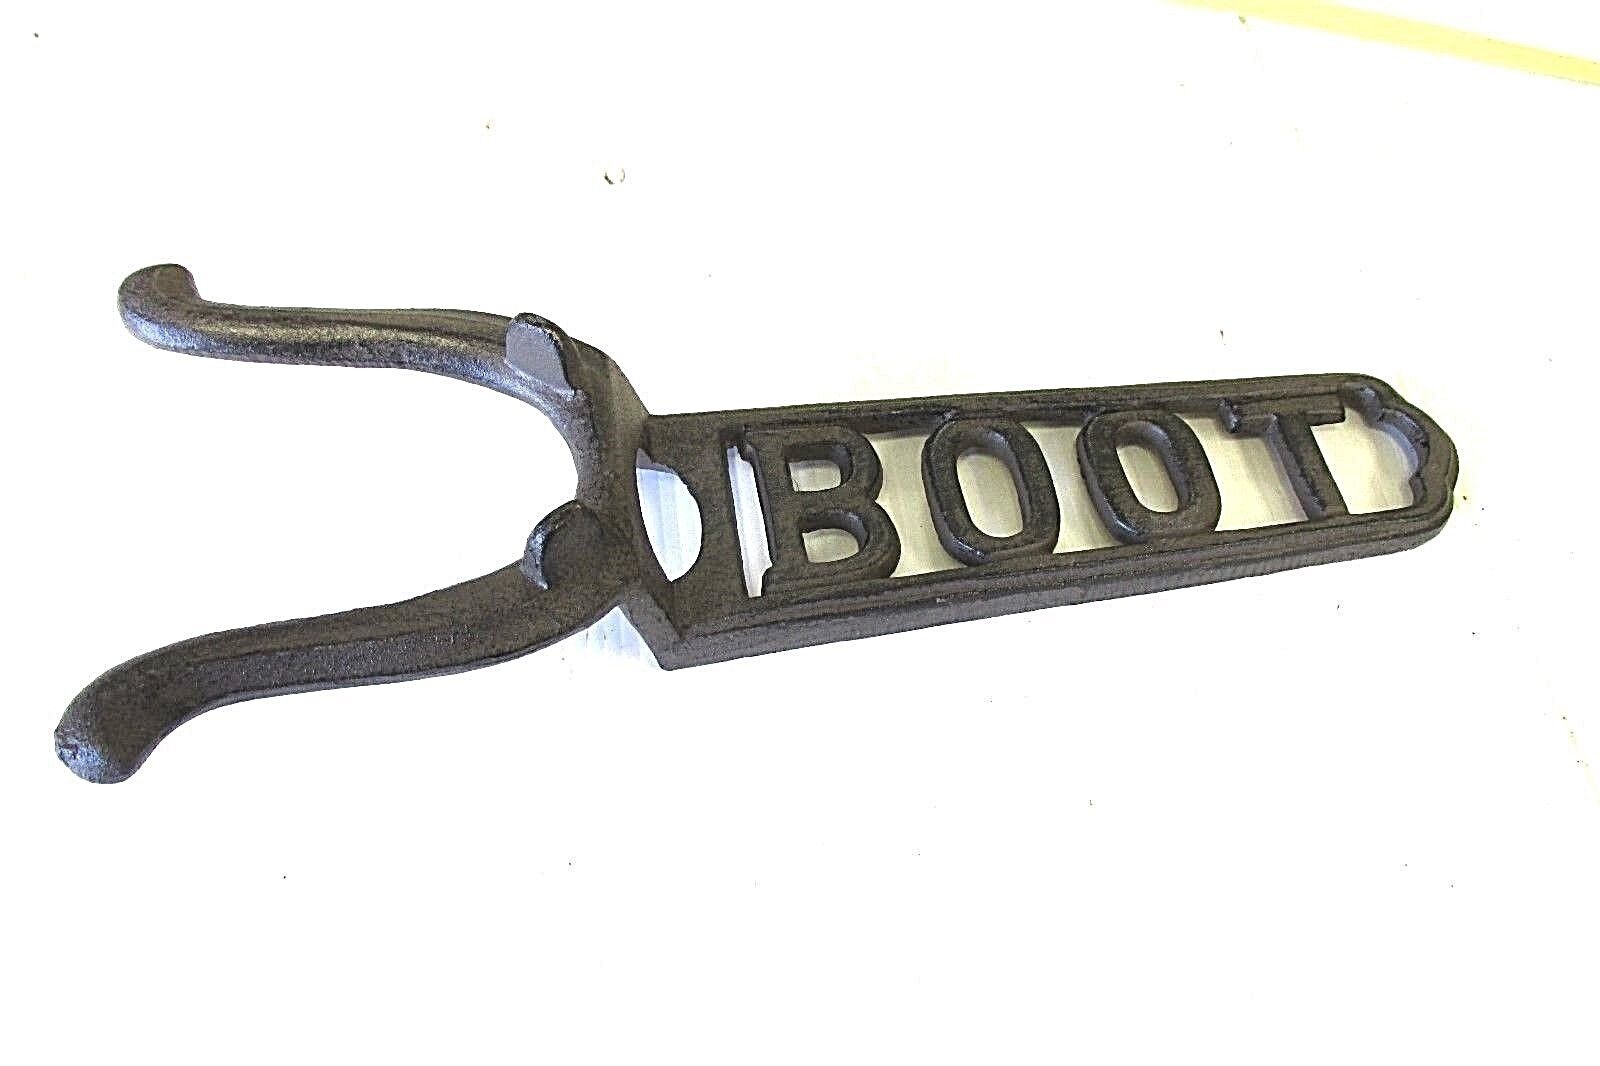  CAST IRON   BOOT  SHOE  PULLER  TOOL  